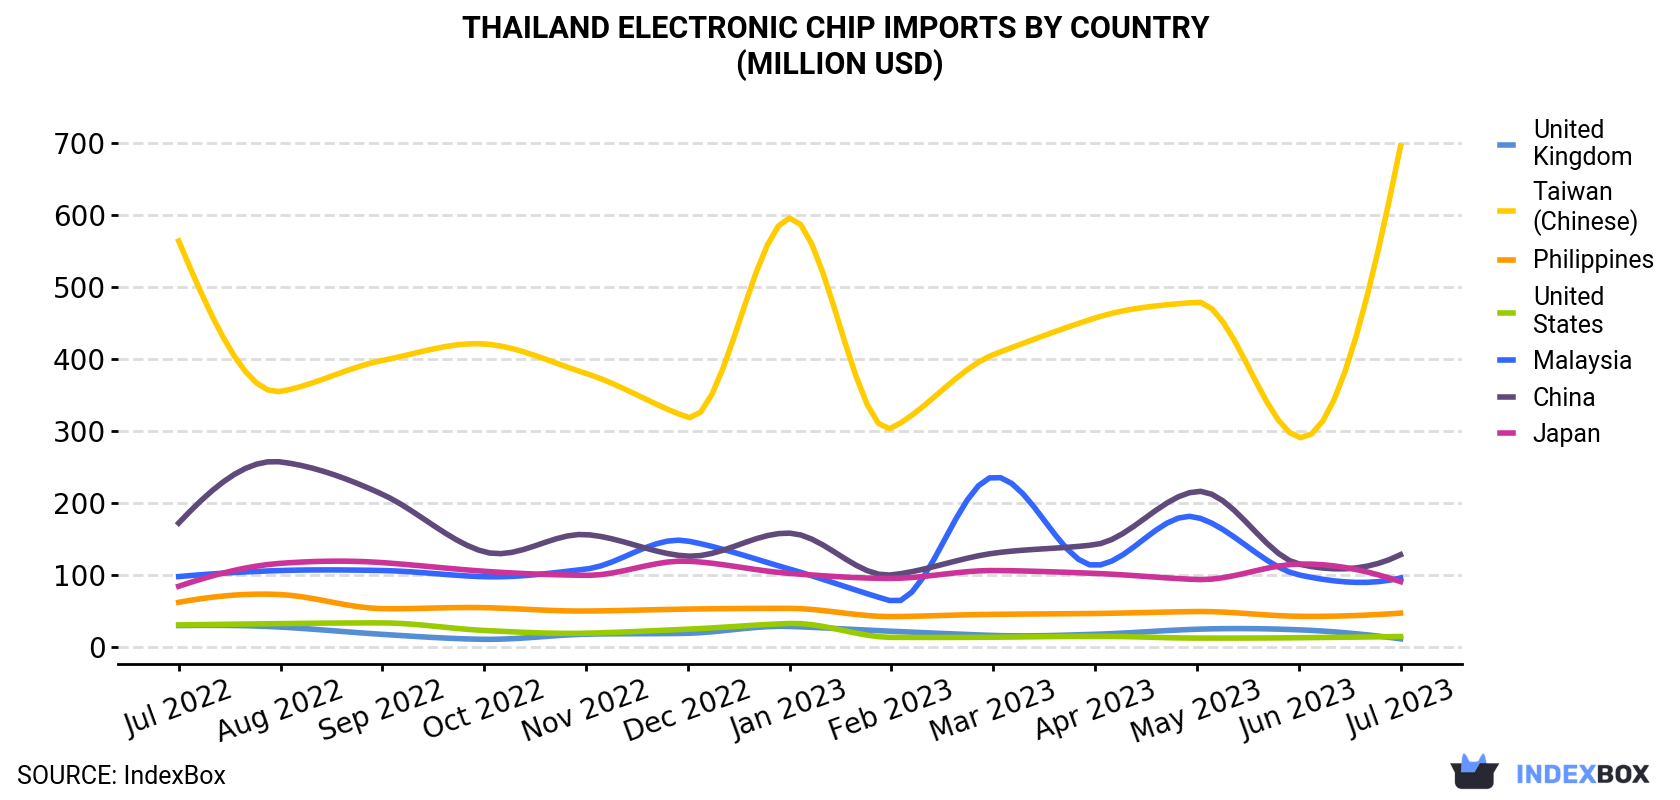 Thailand Electronic Chip Imports By Country (Million USD)